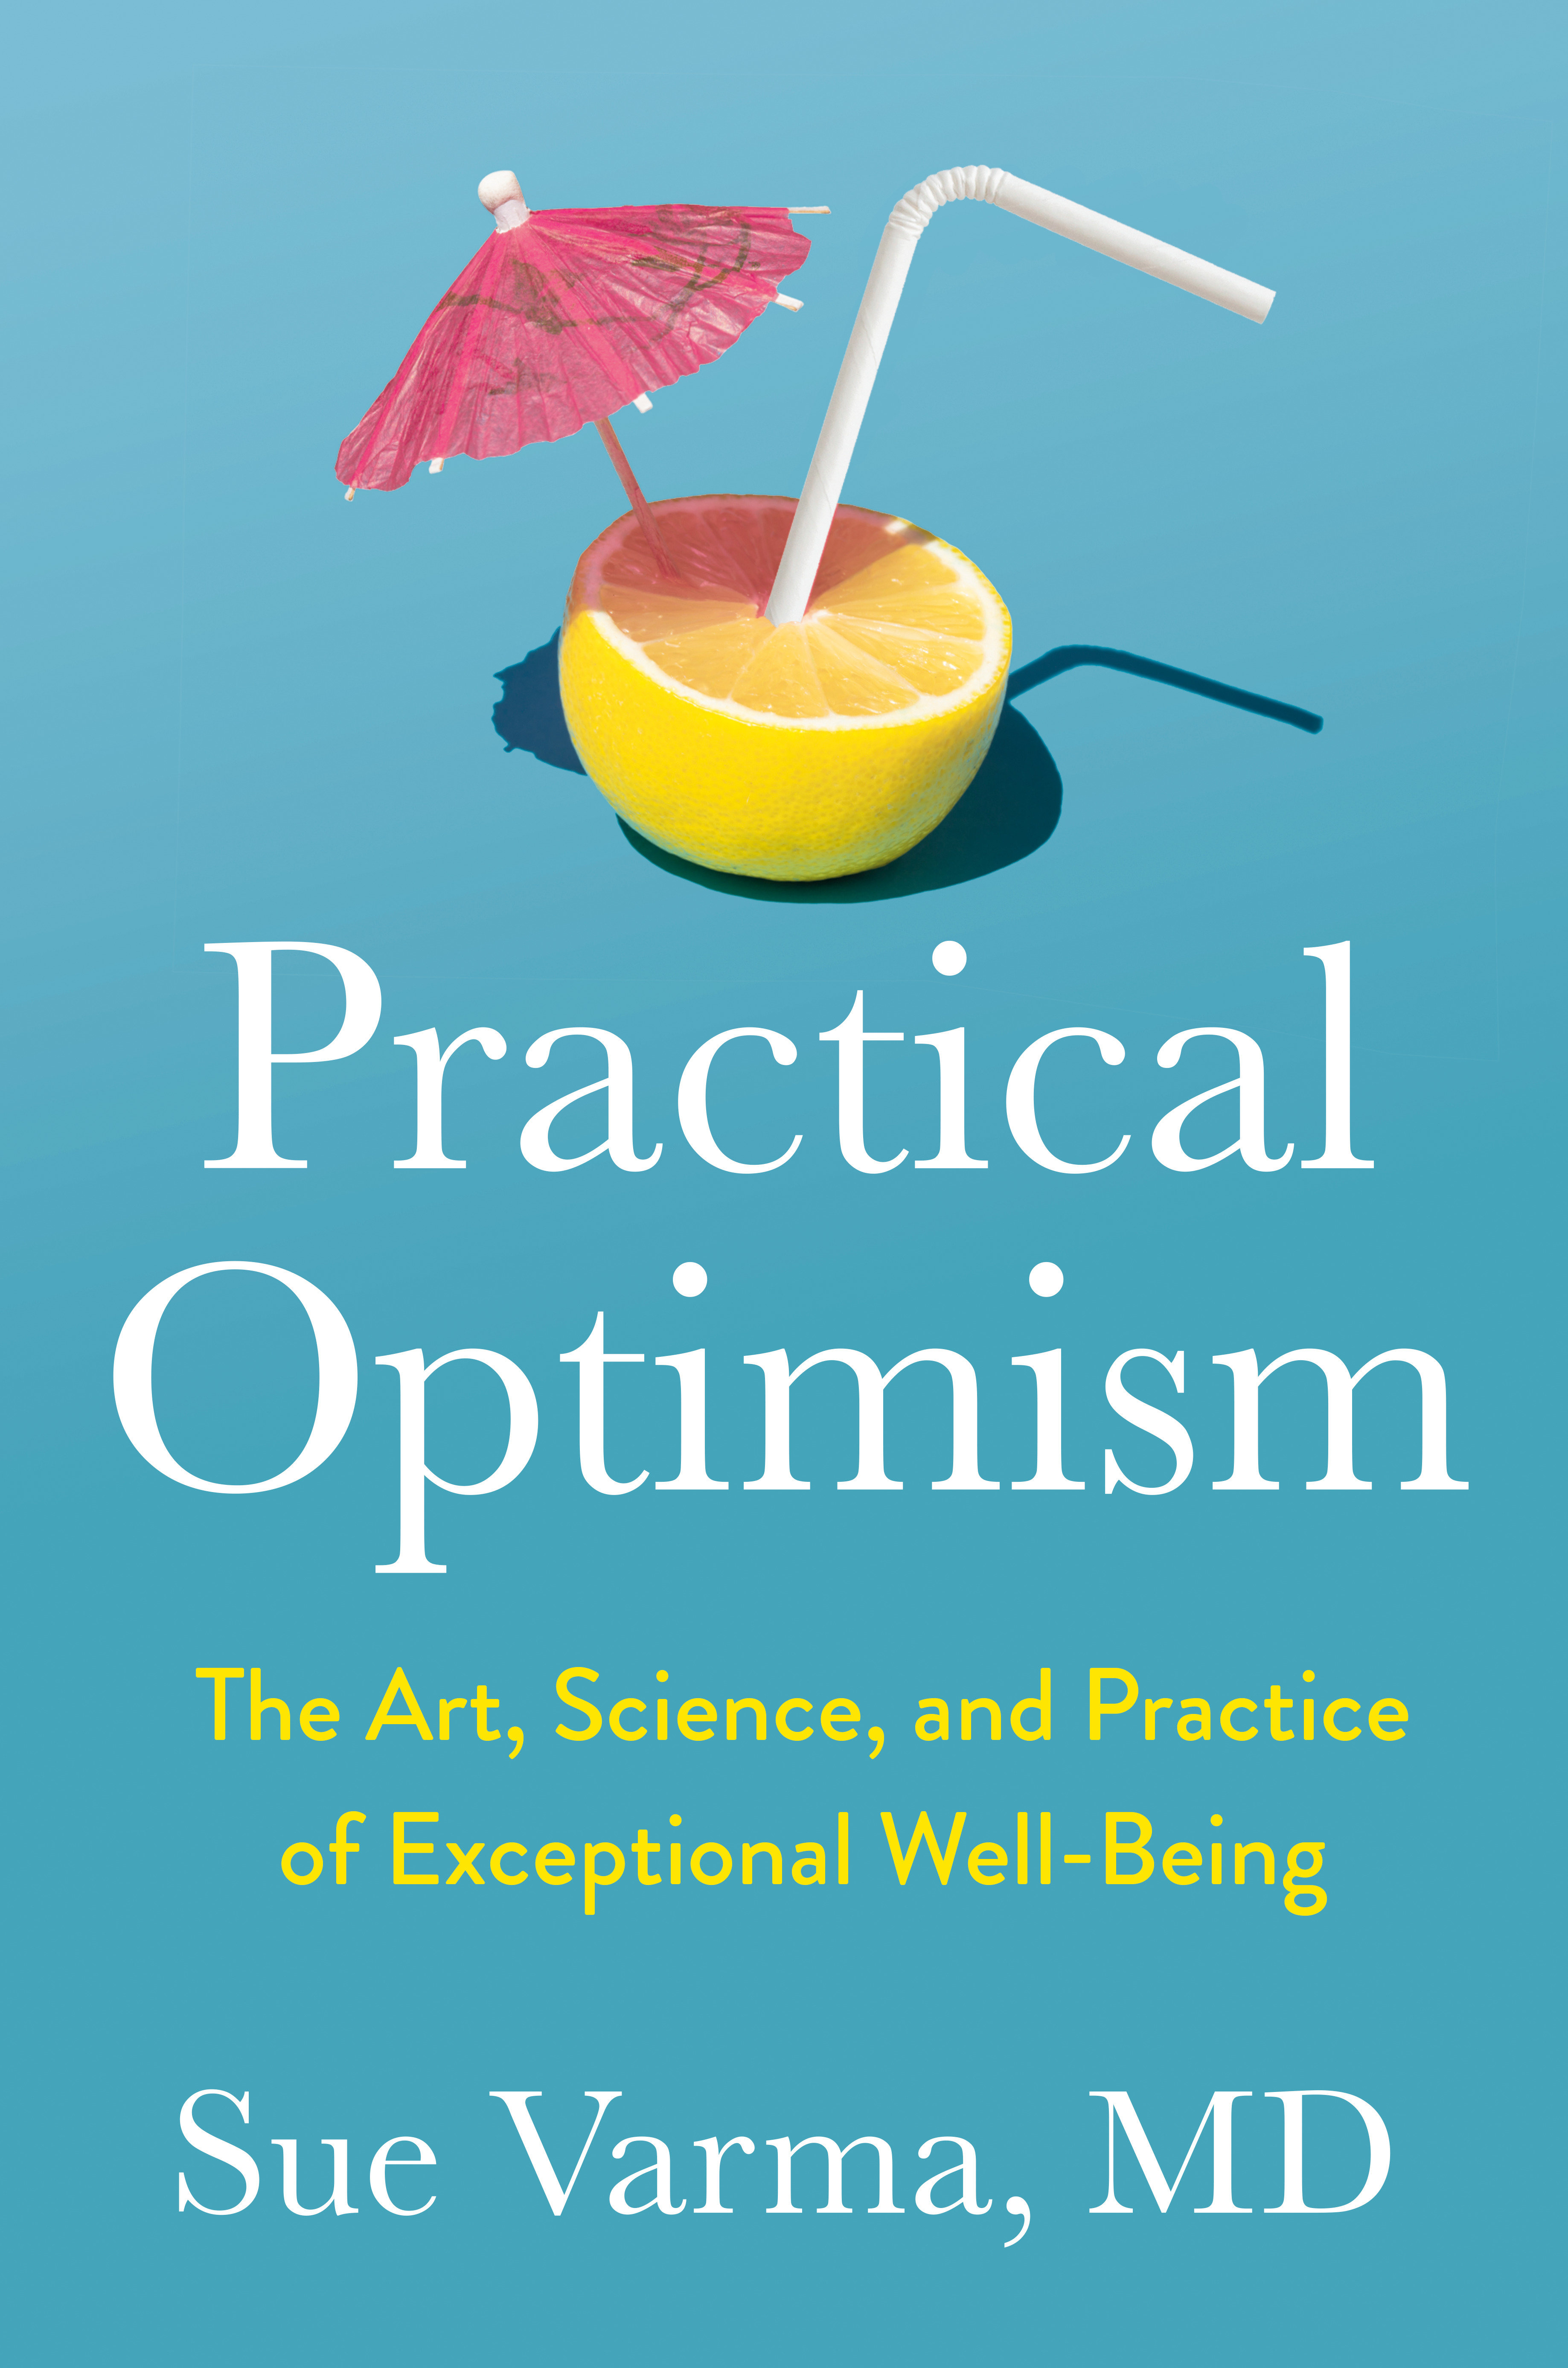 Practical Optimism The Art, Science, and Practice of Exceptional Well-Being cover image